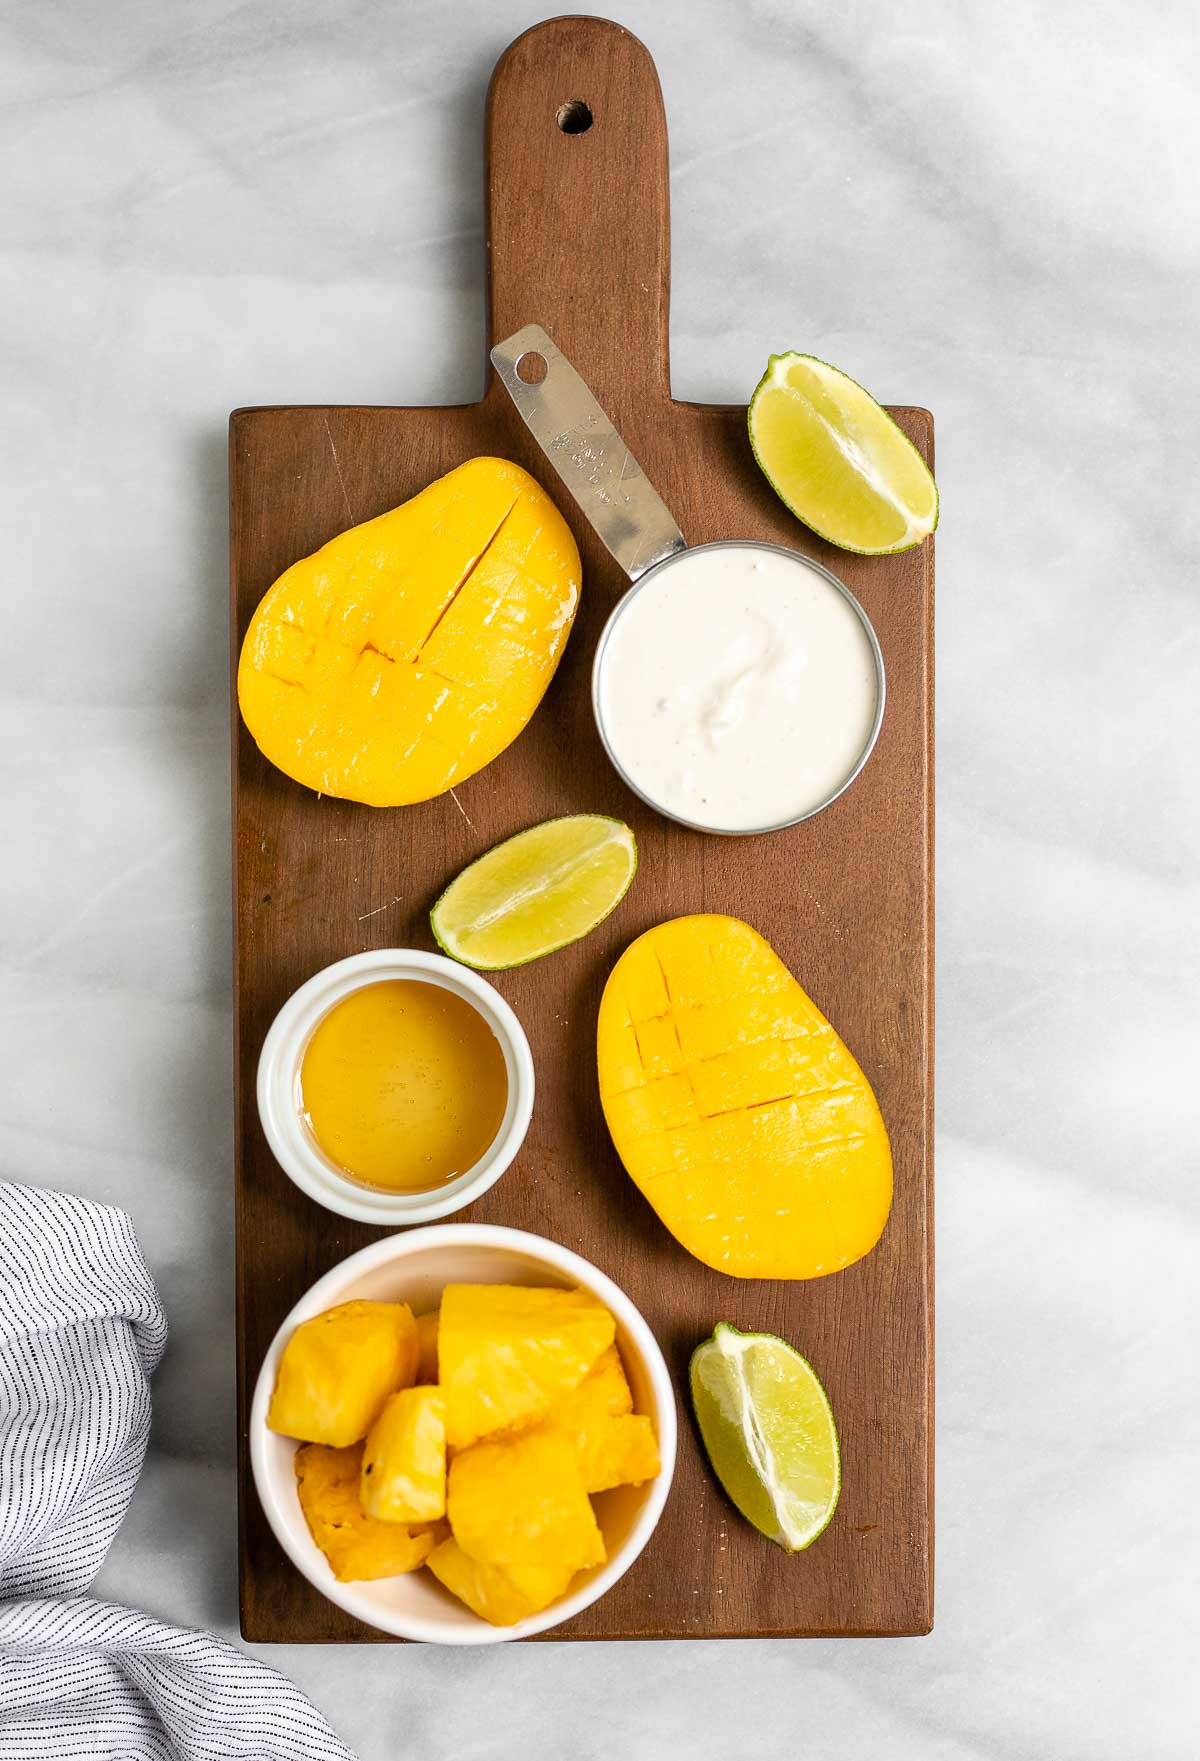 Ingredients for the mango popsicles on a wood board.